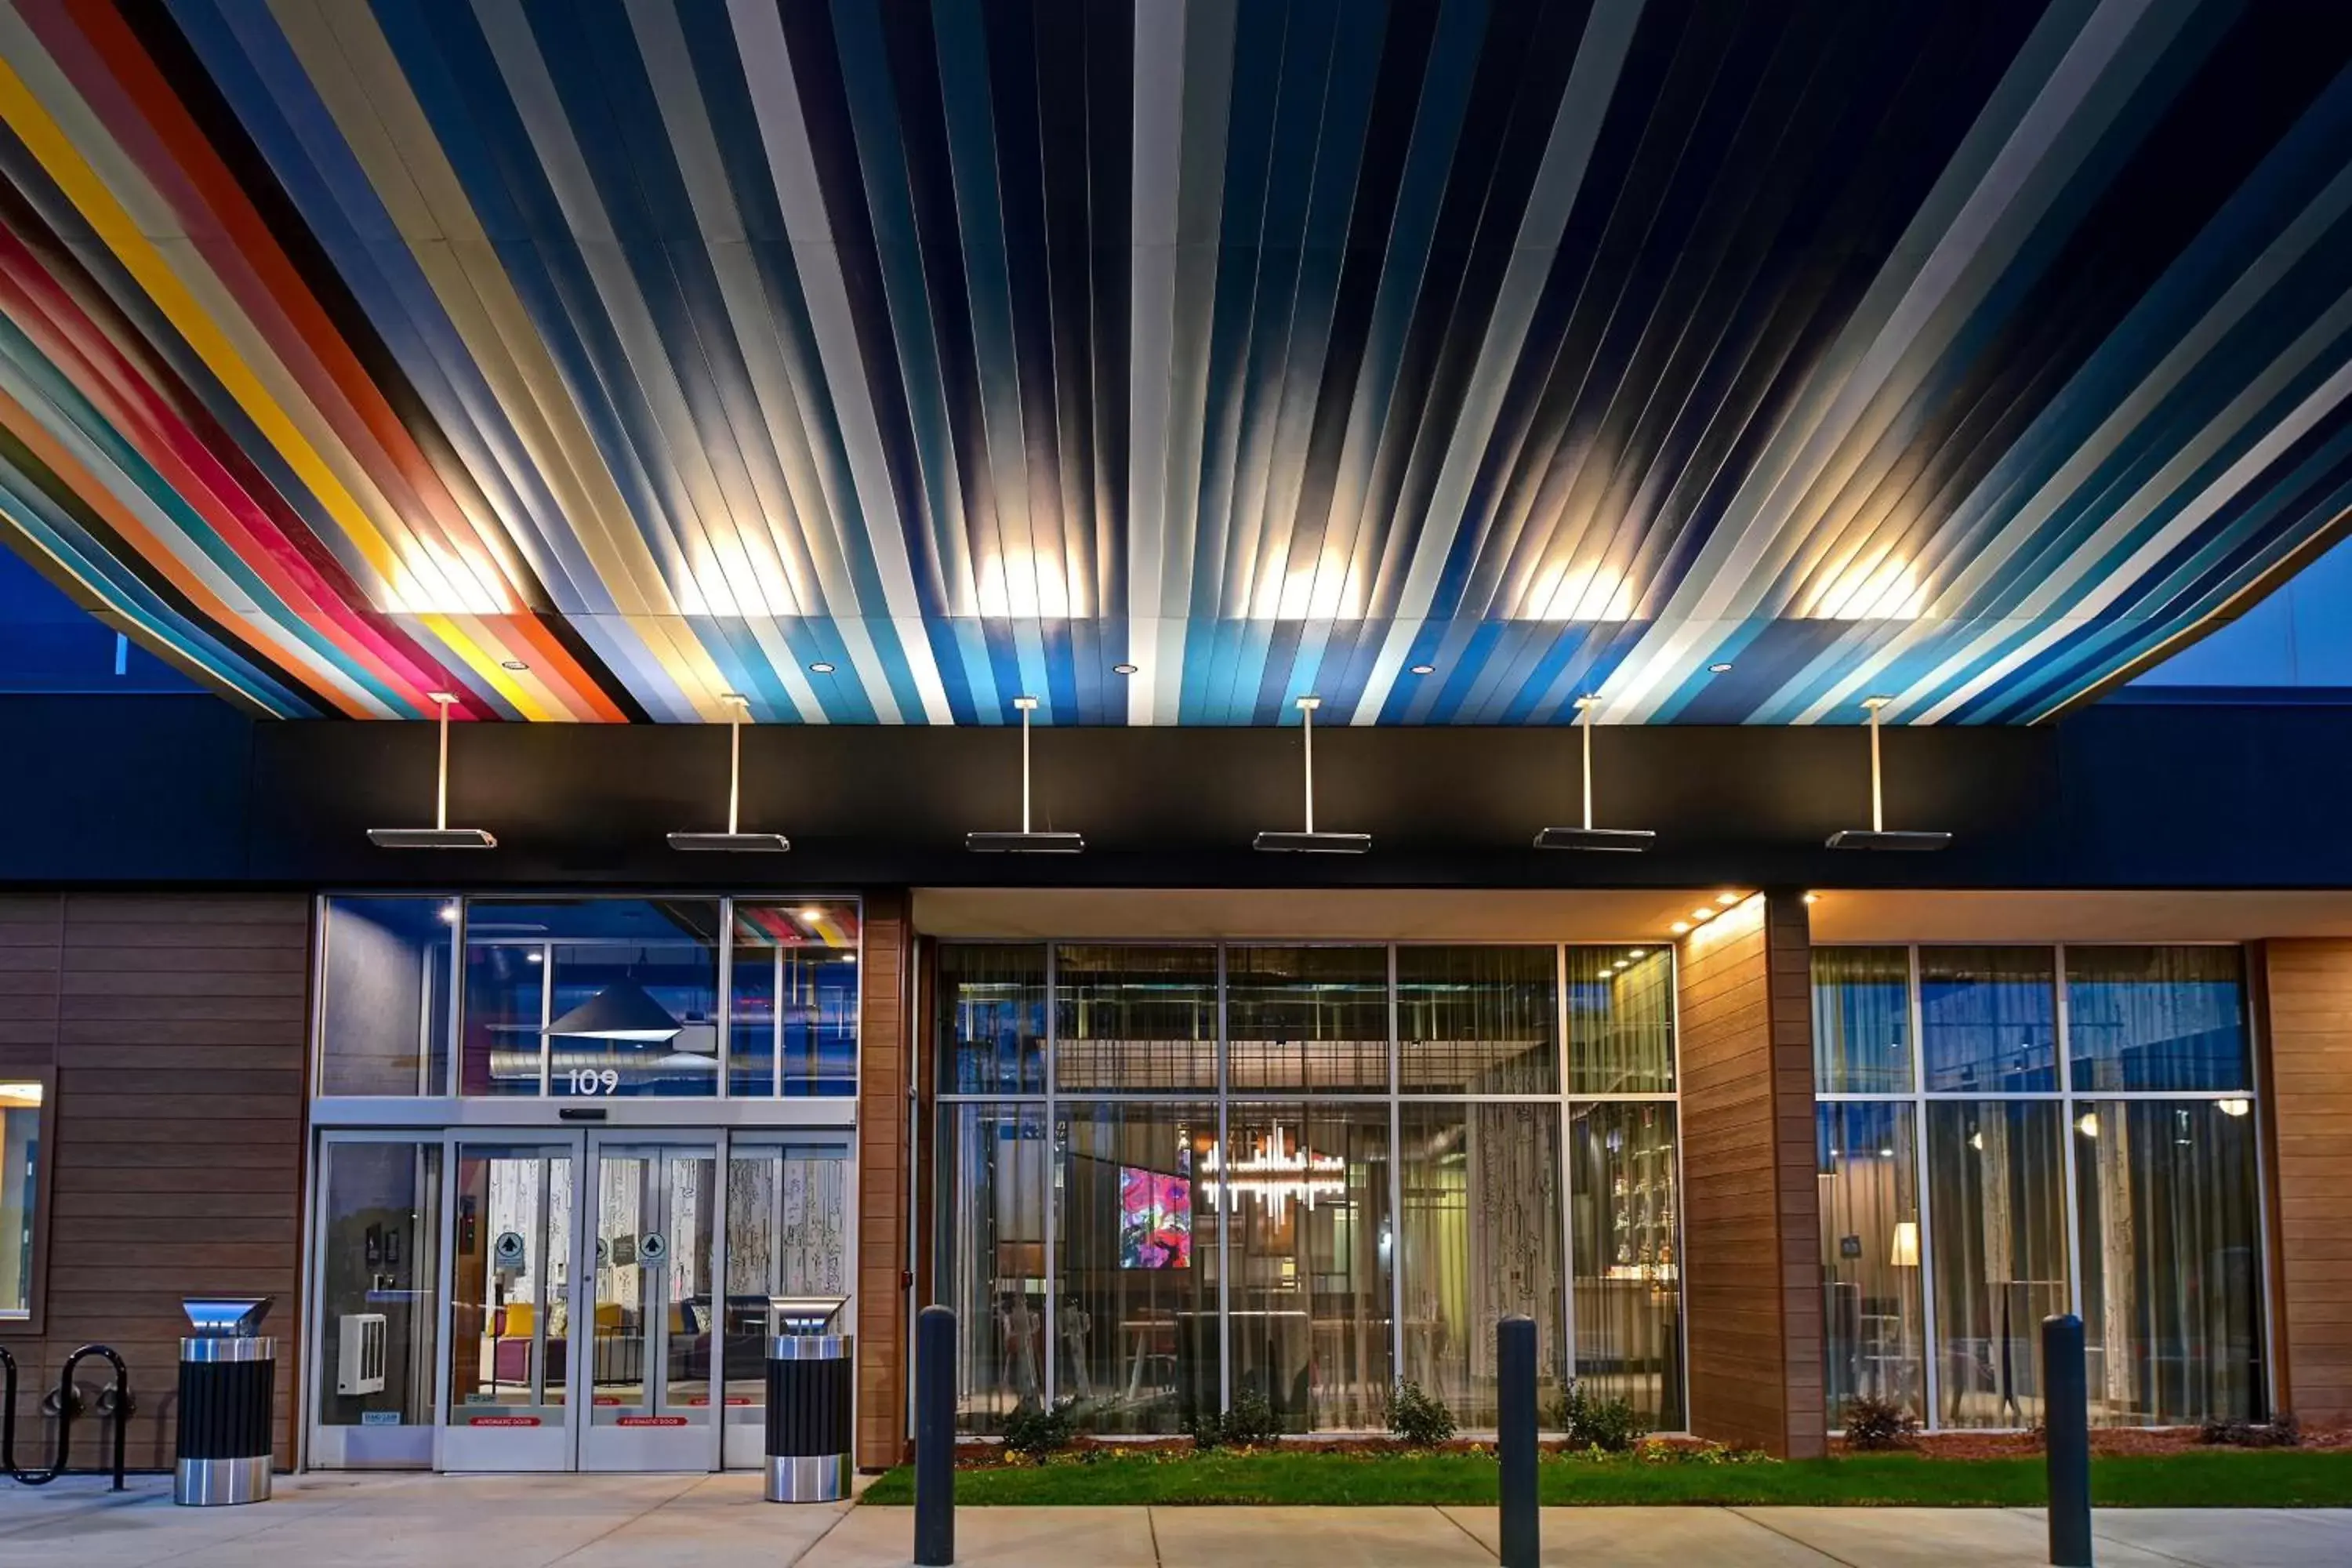 Property building in Aloft Mooresville